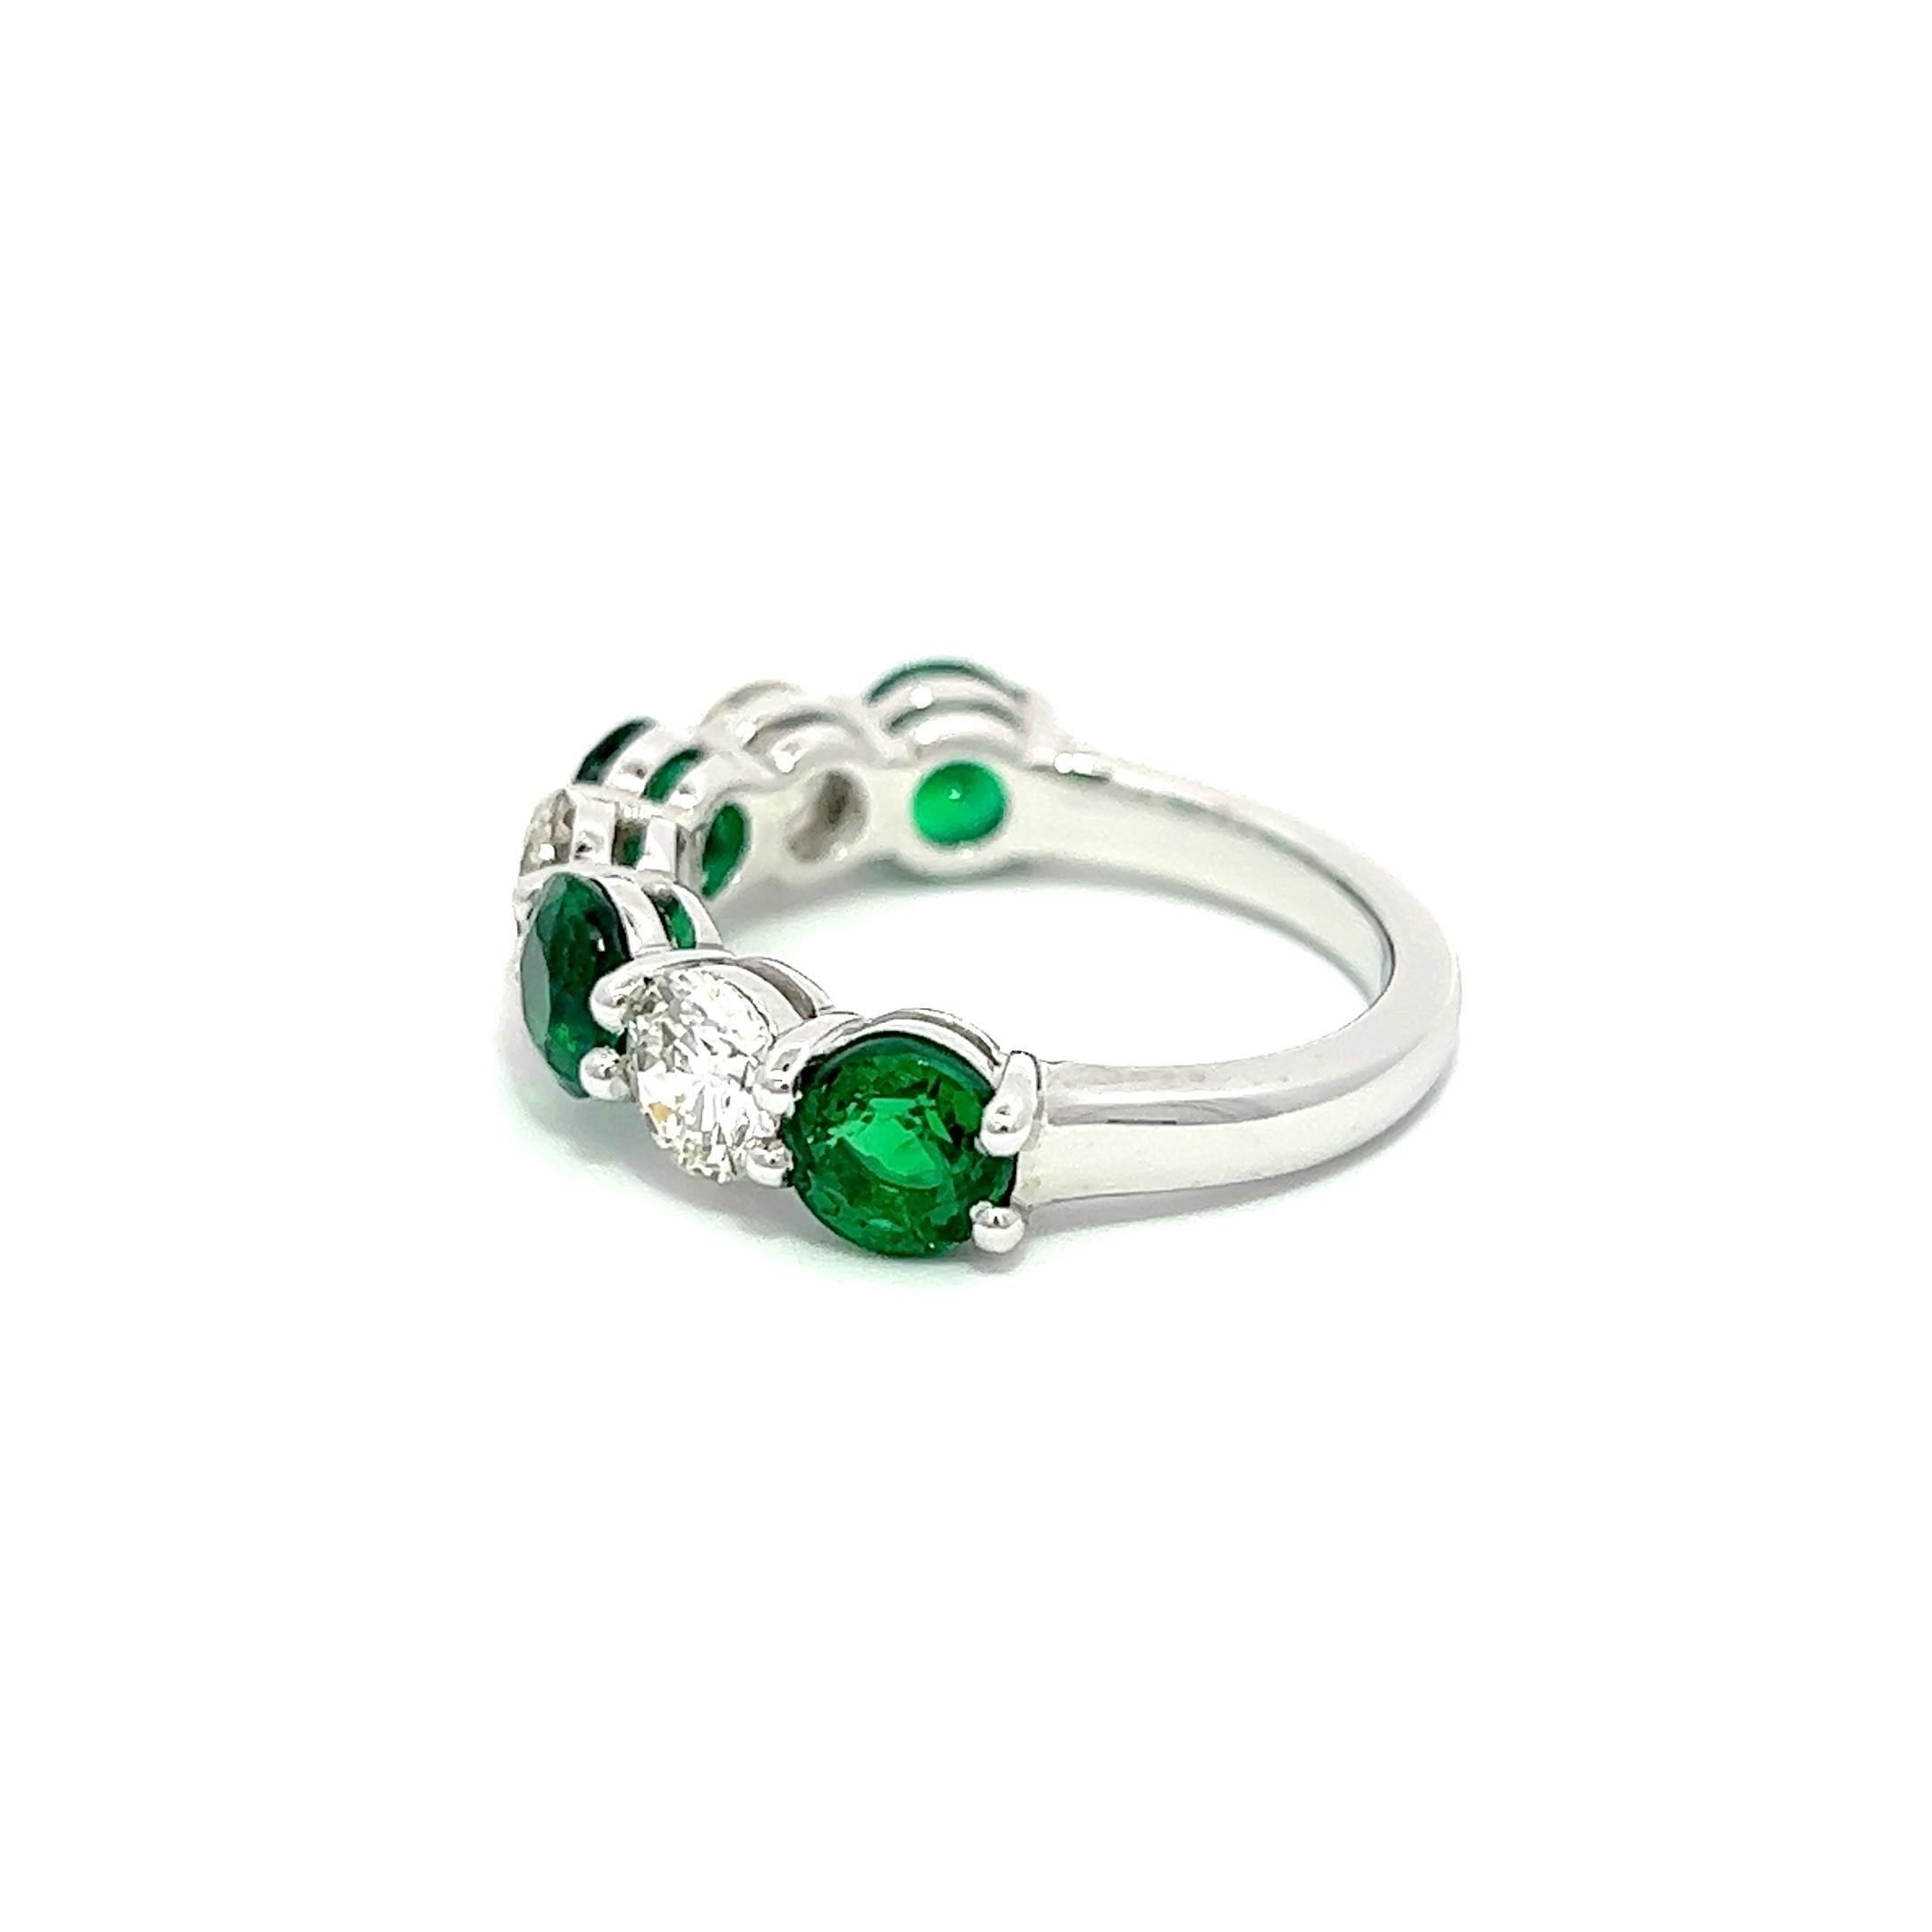 This ultimate classic eternity ring symbolizes eternal love - a promise of a lifelong commitment. Round diamonds & Zambian  Natural Emeralds with a platinum setting. A gallery is created as the diamonds & Emeralds are slightly elevated, featuring a